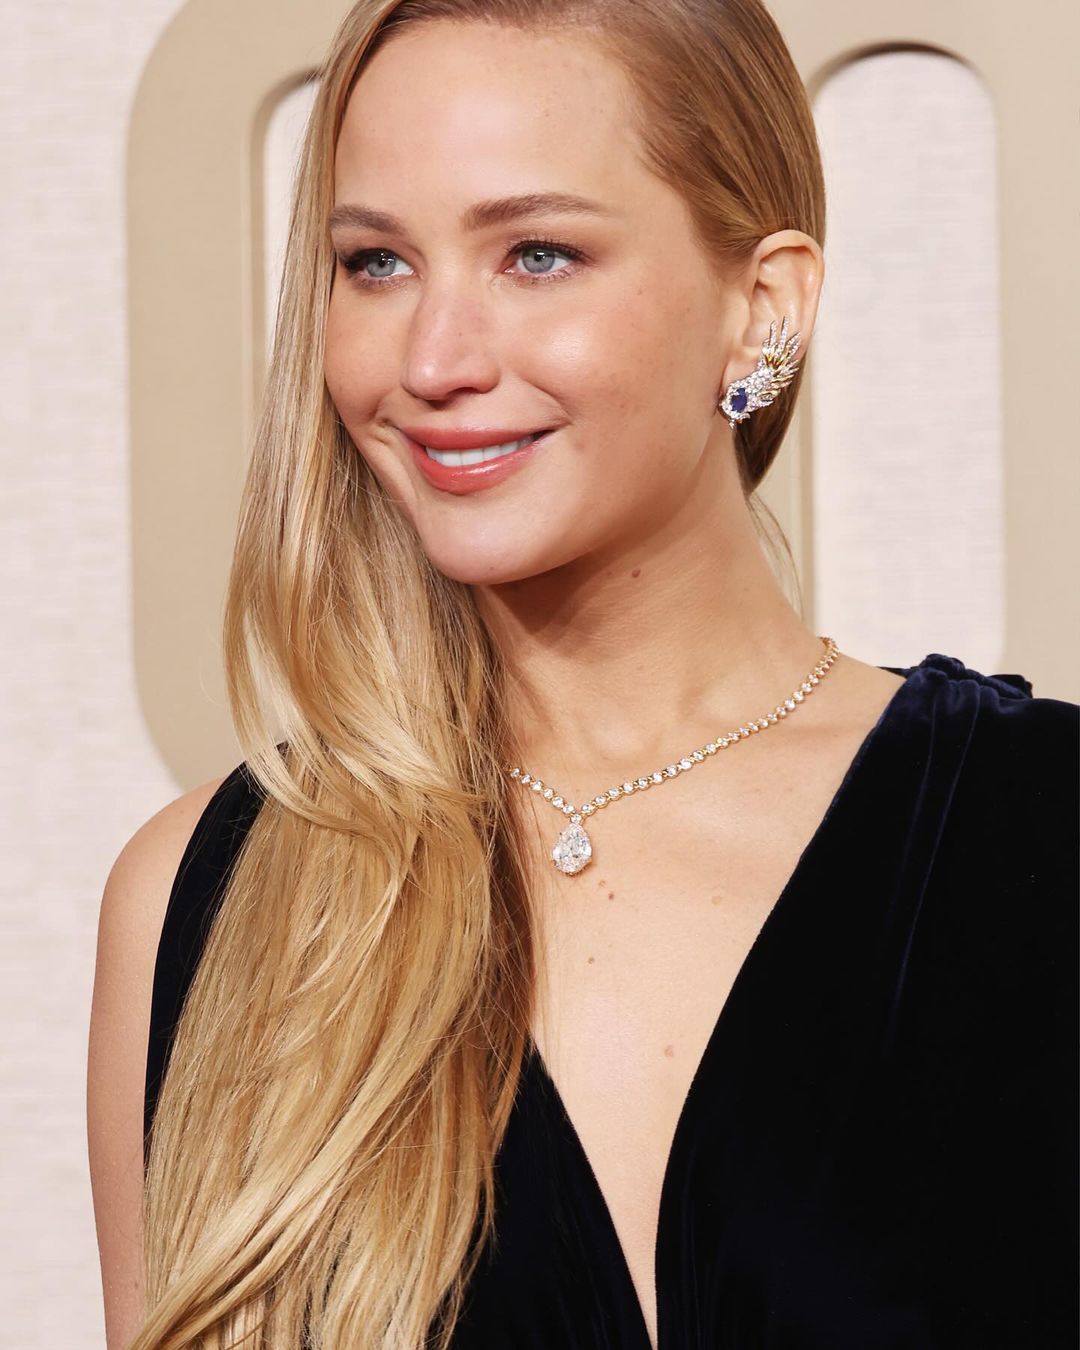 Jennifer Lawrence goes for the classic look with an 11-carat diamond giving the wow factor